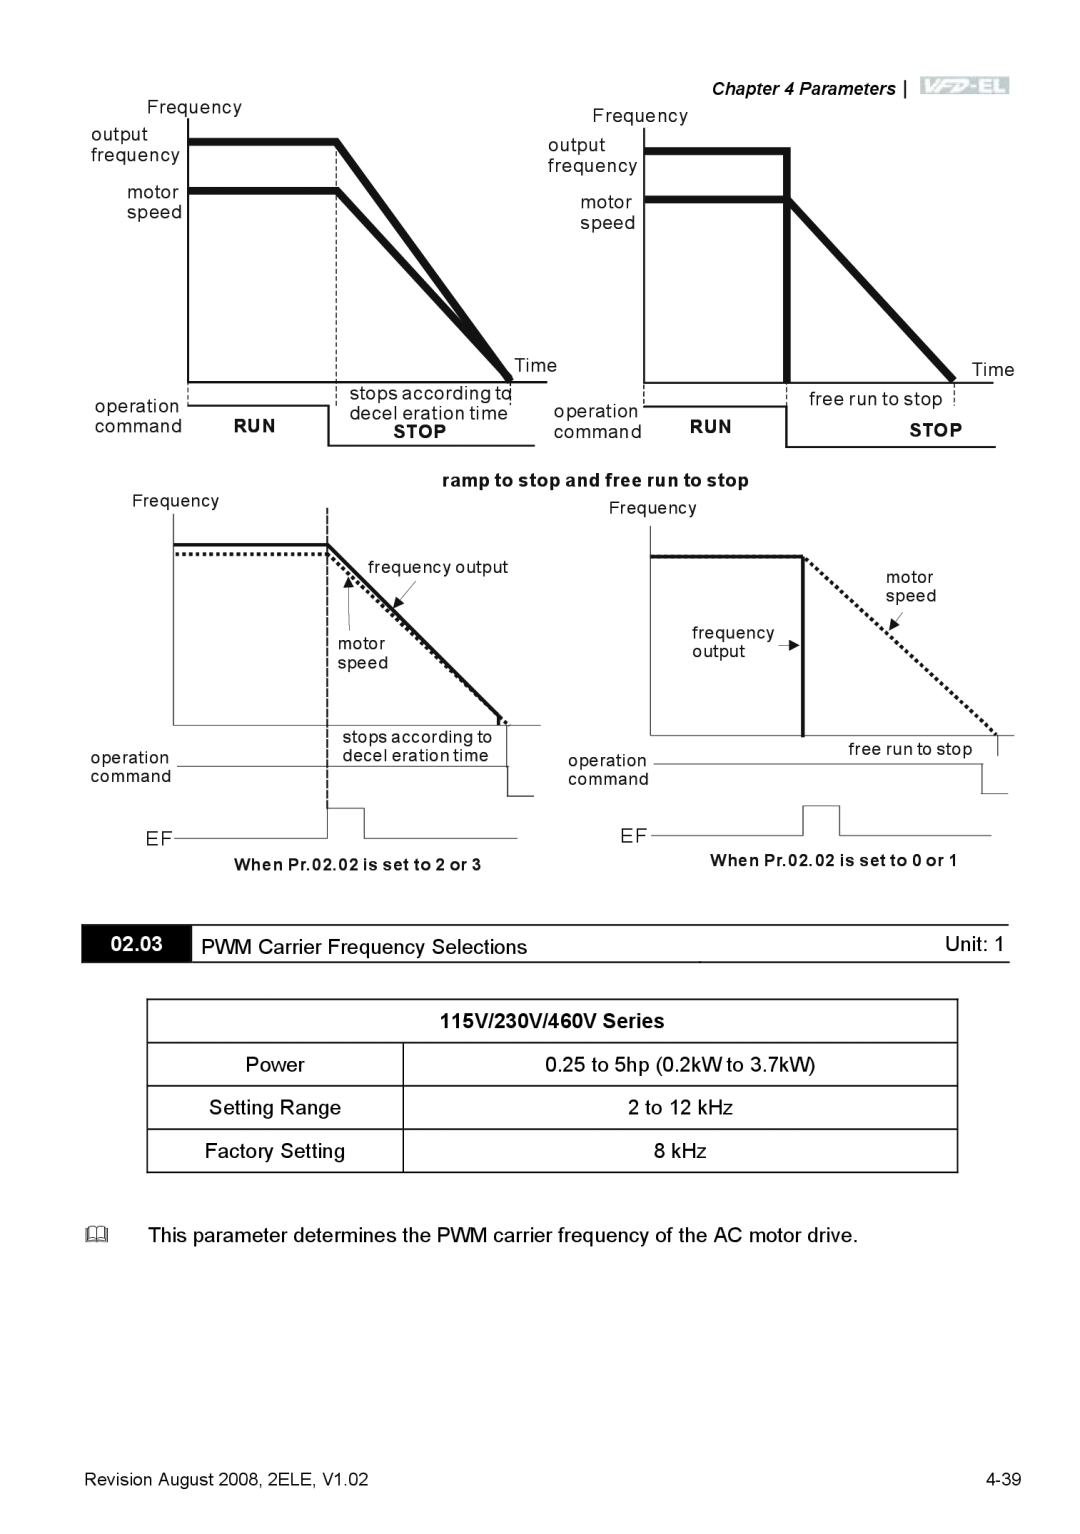 Delta Electronics VFD-EL manual 02.03, Parameters, Stop, ramp to stop and free run to stop, When Pr.02.02 is set to 2 or 